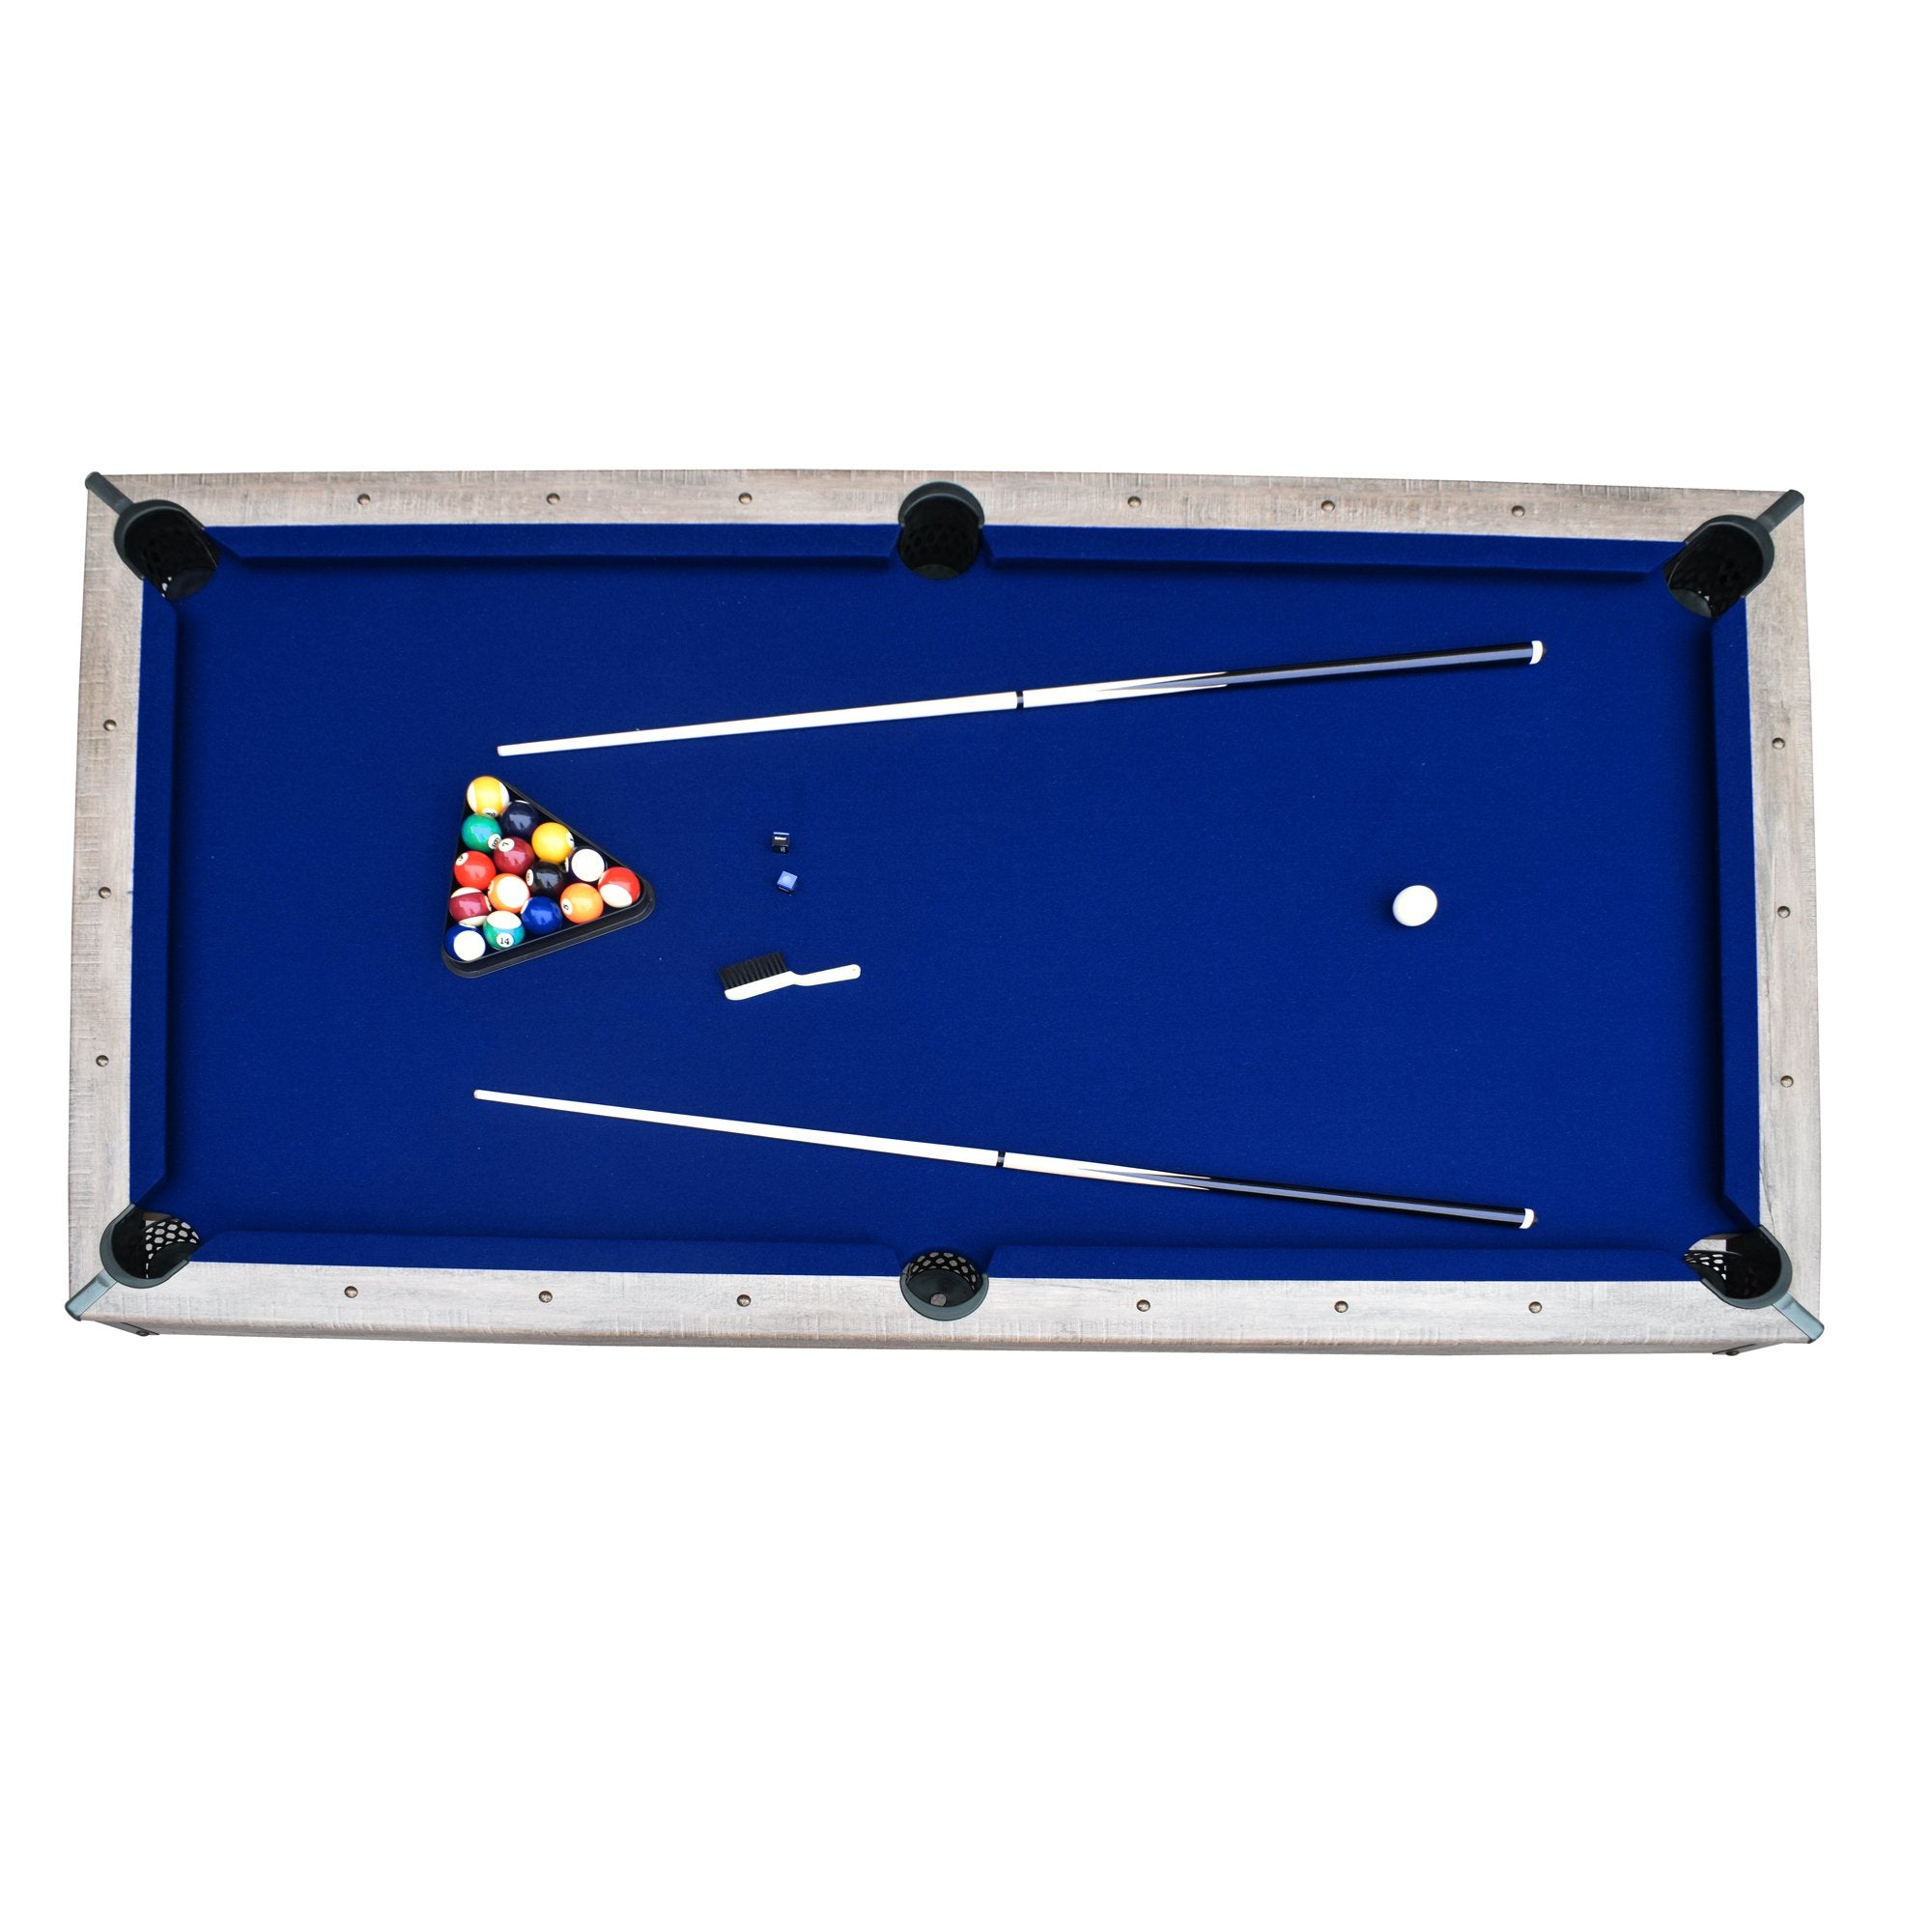 Hathaway Logan 7-Ft 3 in 1 Pool Table with Benches - Multi-Game Table with  Ping Pong and Billiards - Brown Finish - Indoor Use in the Multi-Game Tables  department at